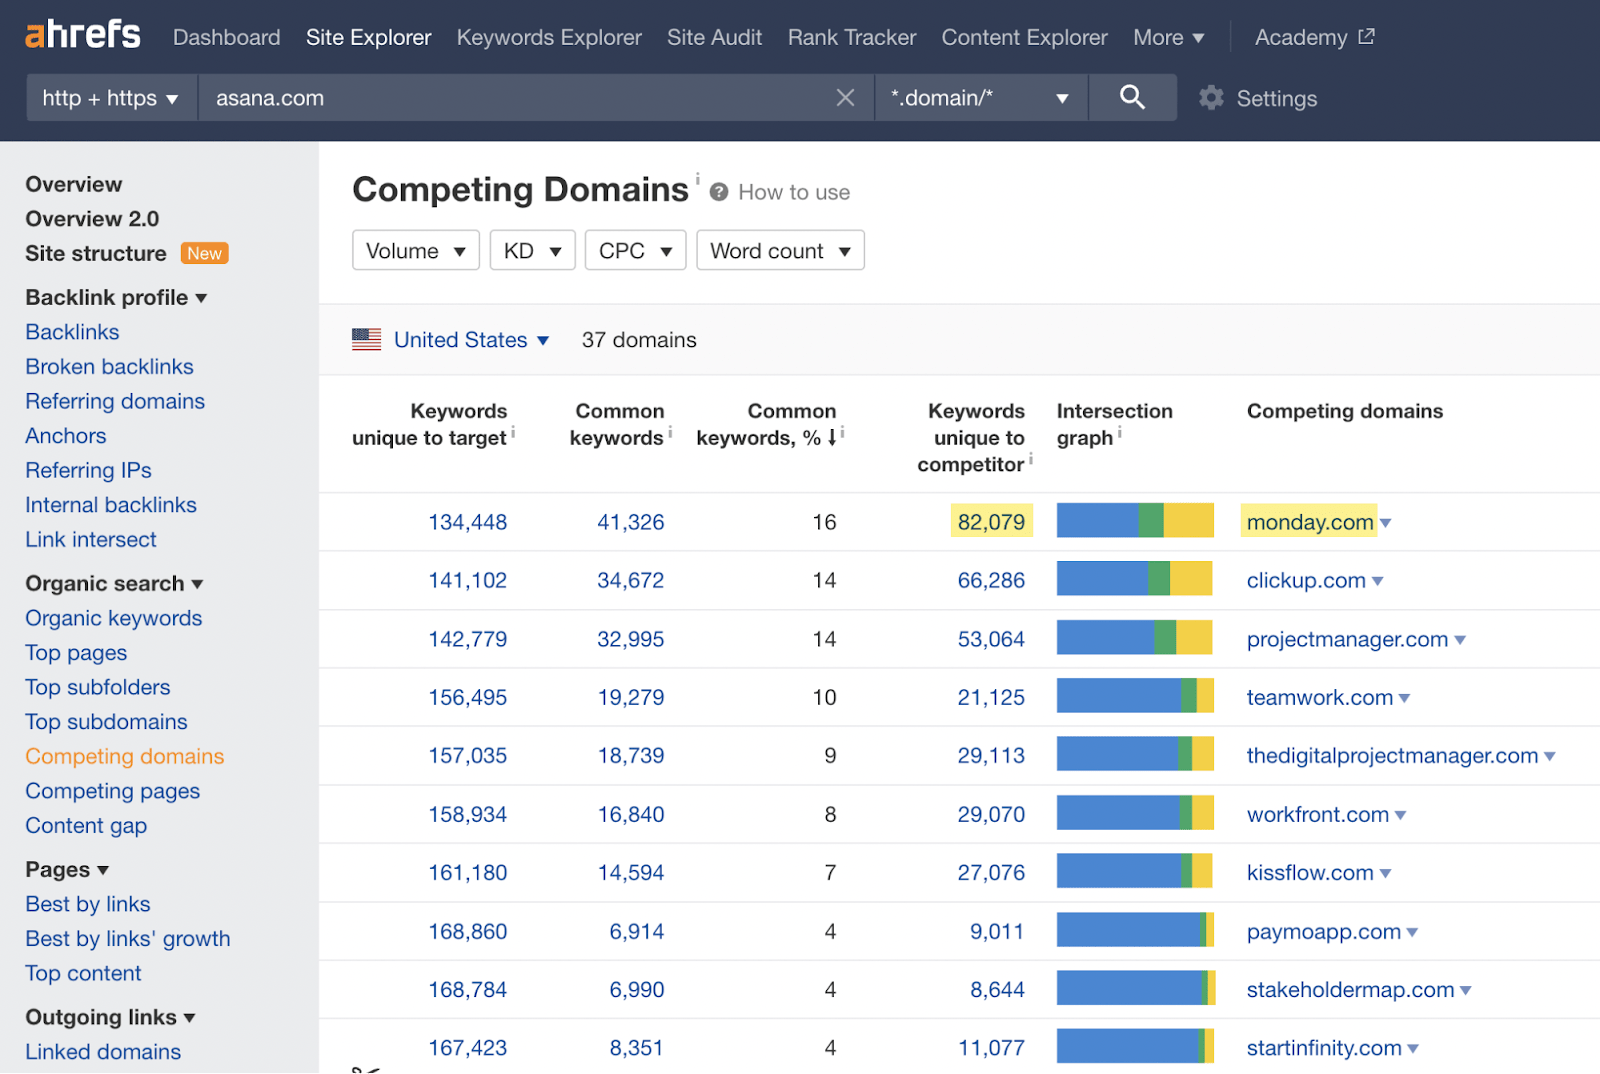 Competing Domains report results 